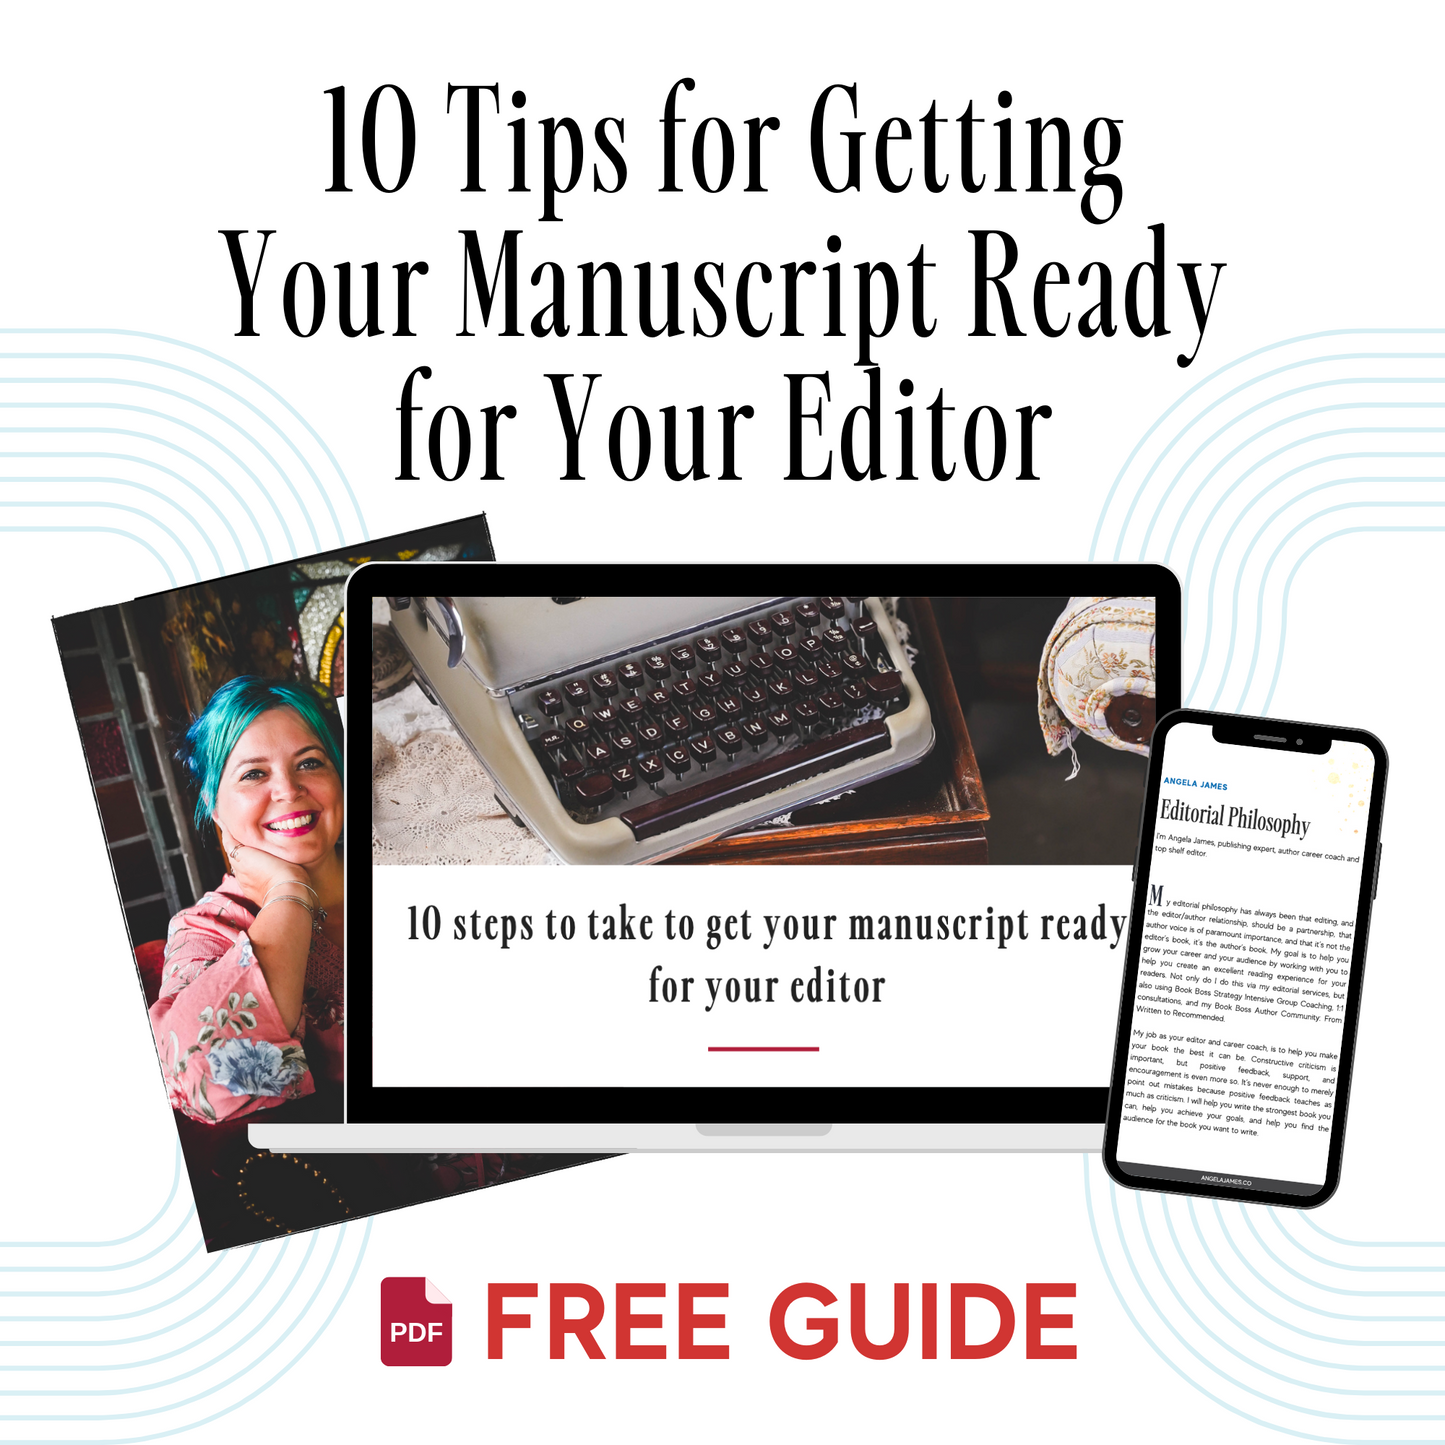 Square product card entitled "10 Tips for Getting Your Manuscript Ready for Your Editor" and subtitled "FREE GUIDE" beside an image of a PDF icon. The product card includes 3 photos: One of Angela James (woman with cool green and blue dyed hair dressed in a pink flower-decorated top and smiling warmly), a laptop computer open to the free guide (10 Steps to take to Get Your Manuscript Ready for Your Editor), and an iPhone displaying a document entitled "Editorial Philosophy."